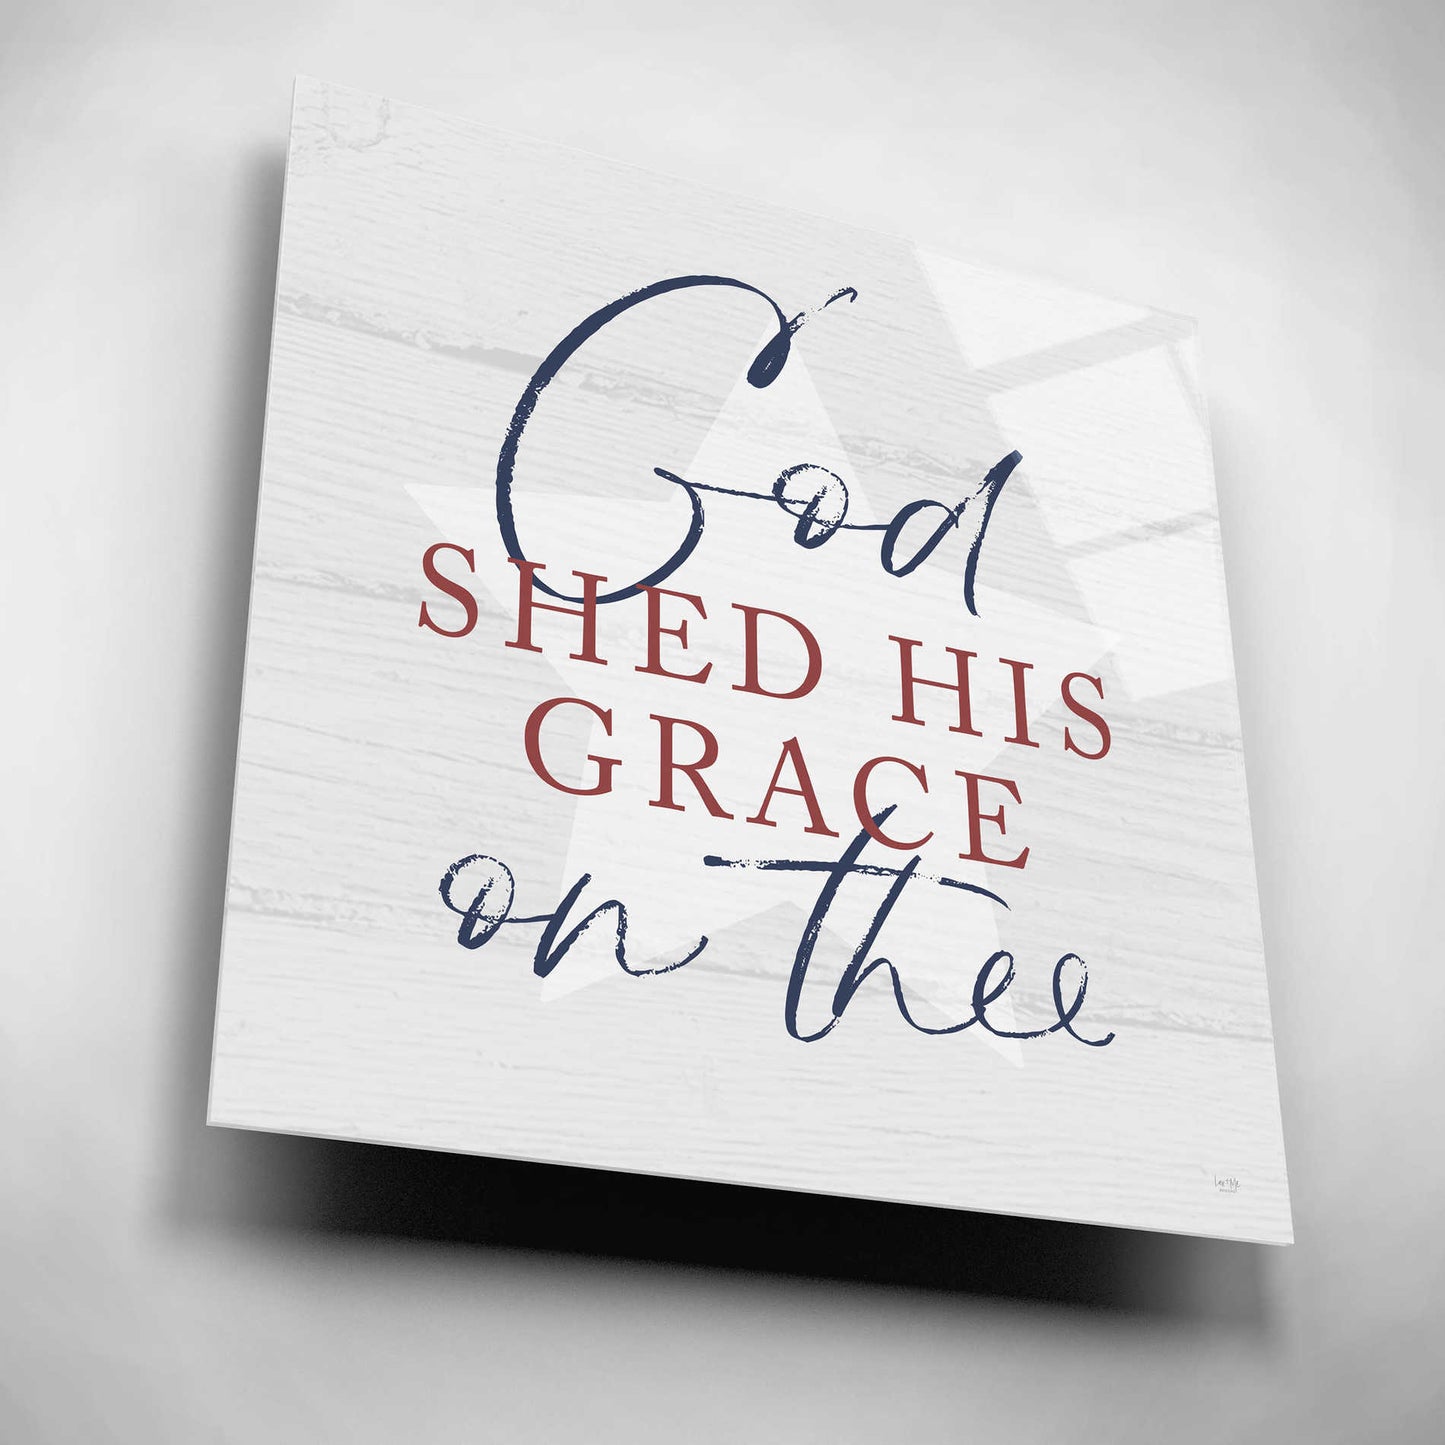 Epic Art 'God Shed His Grace' by Lux + Me, Acrylic Glass Wall Art,12x12